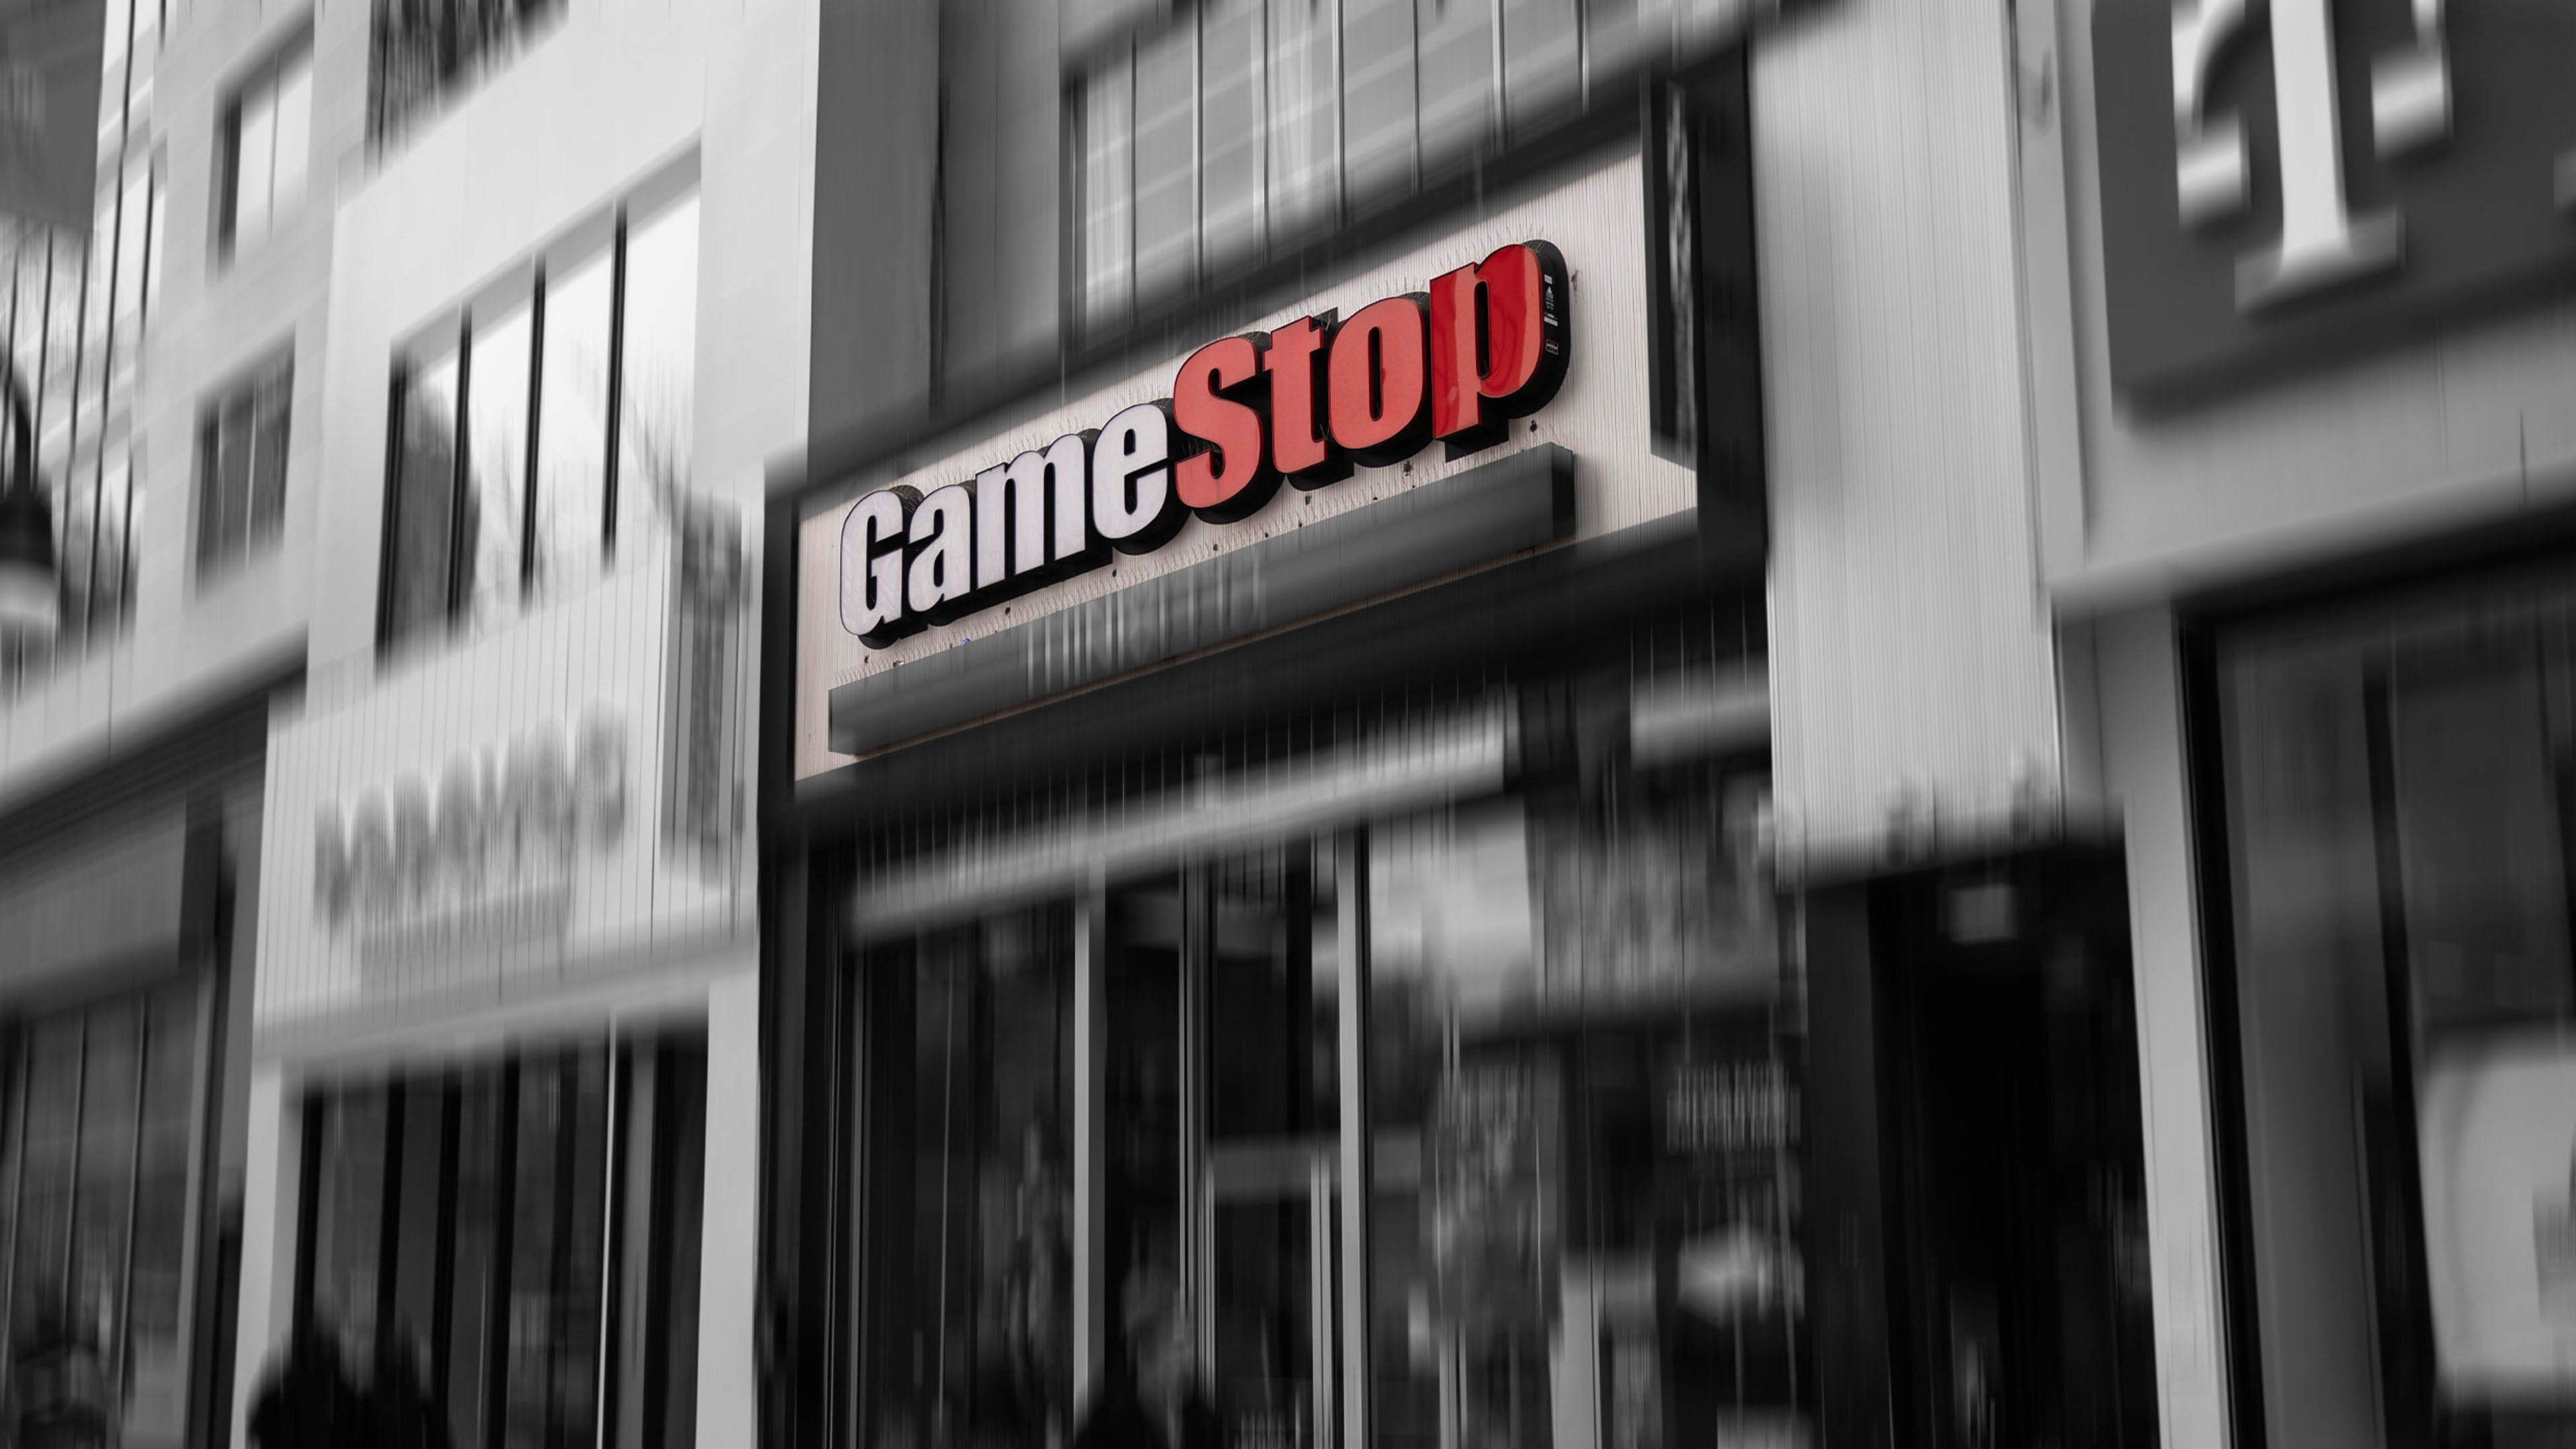 GameStop stock price: GME tanks after weak earnings and abrupt firing of CEO